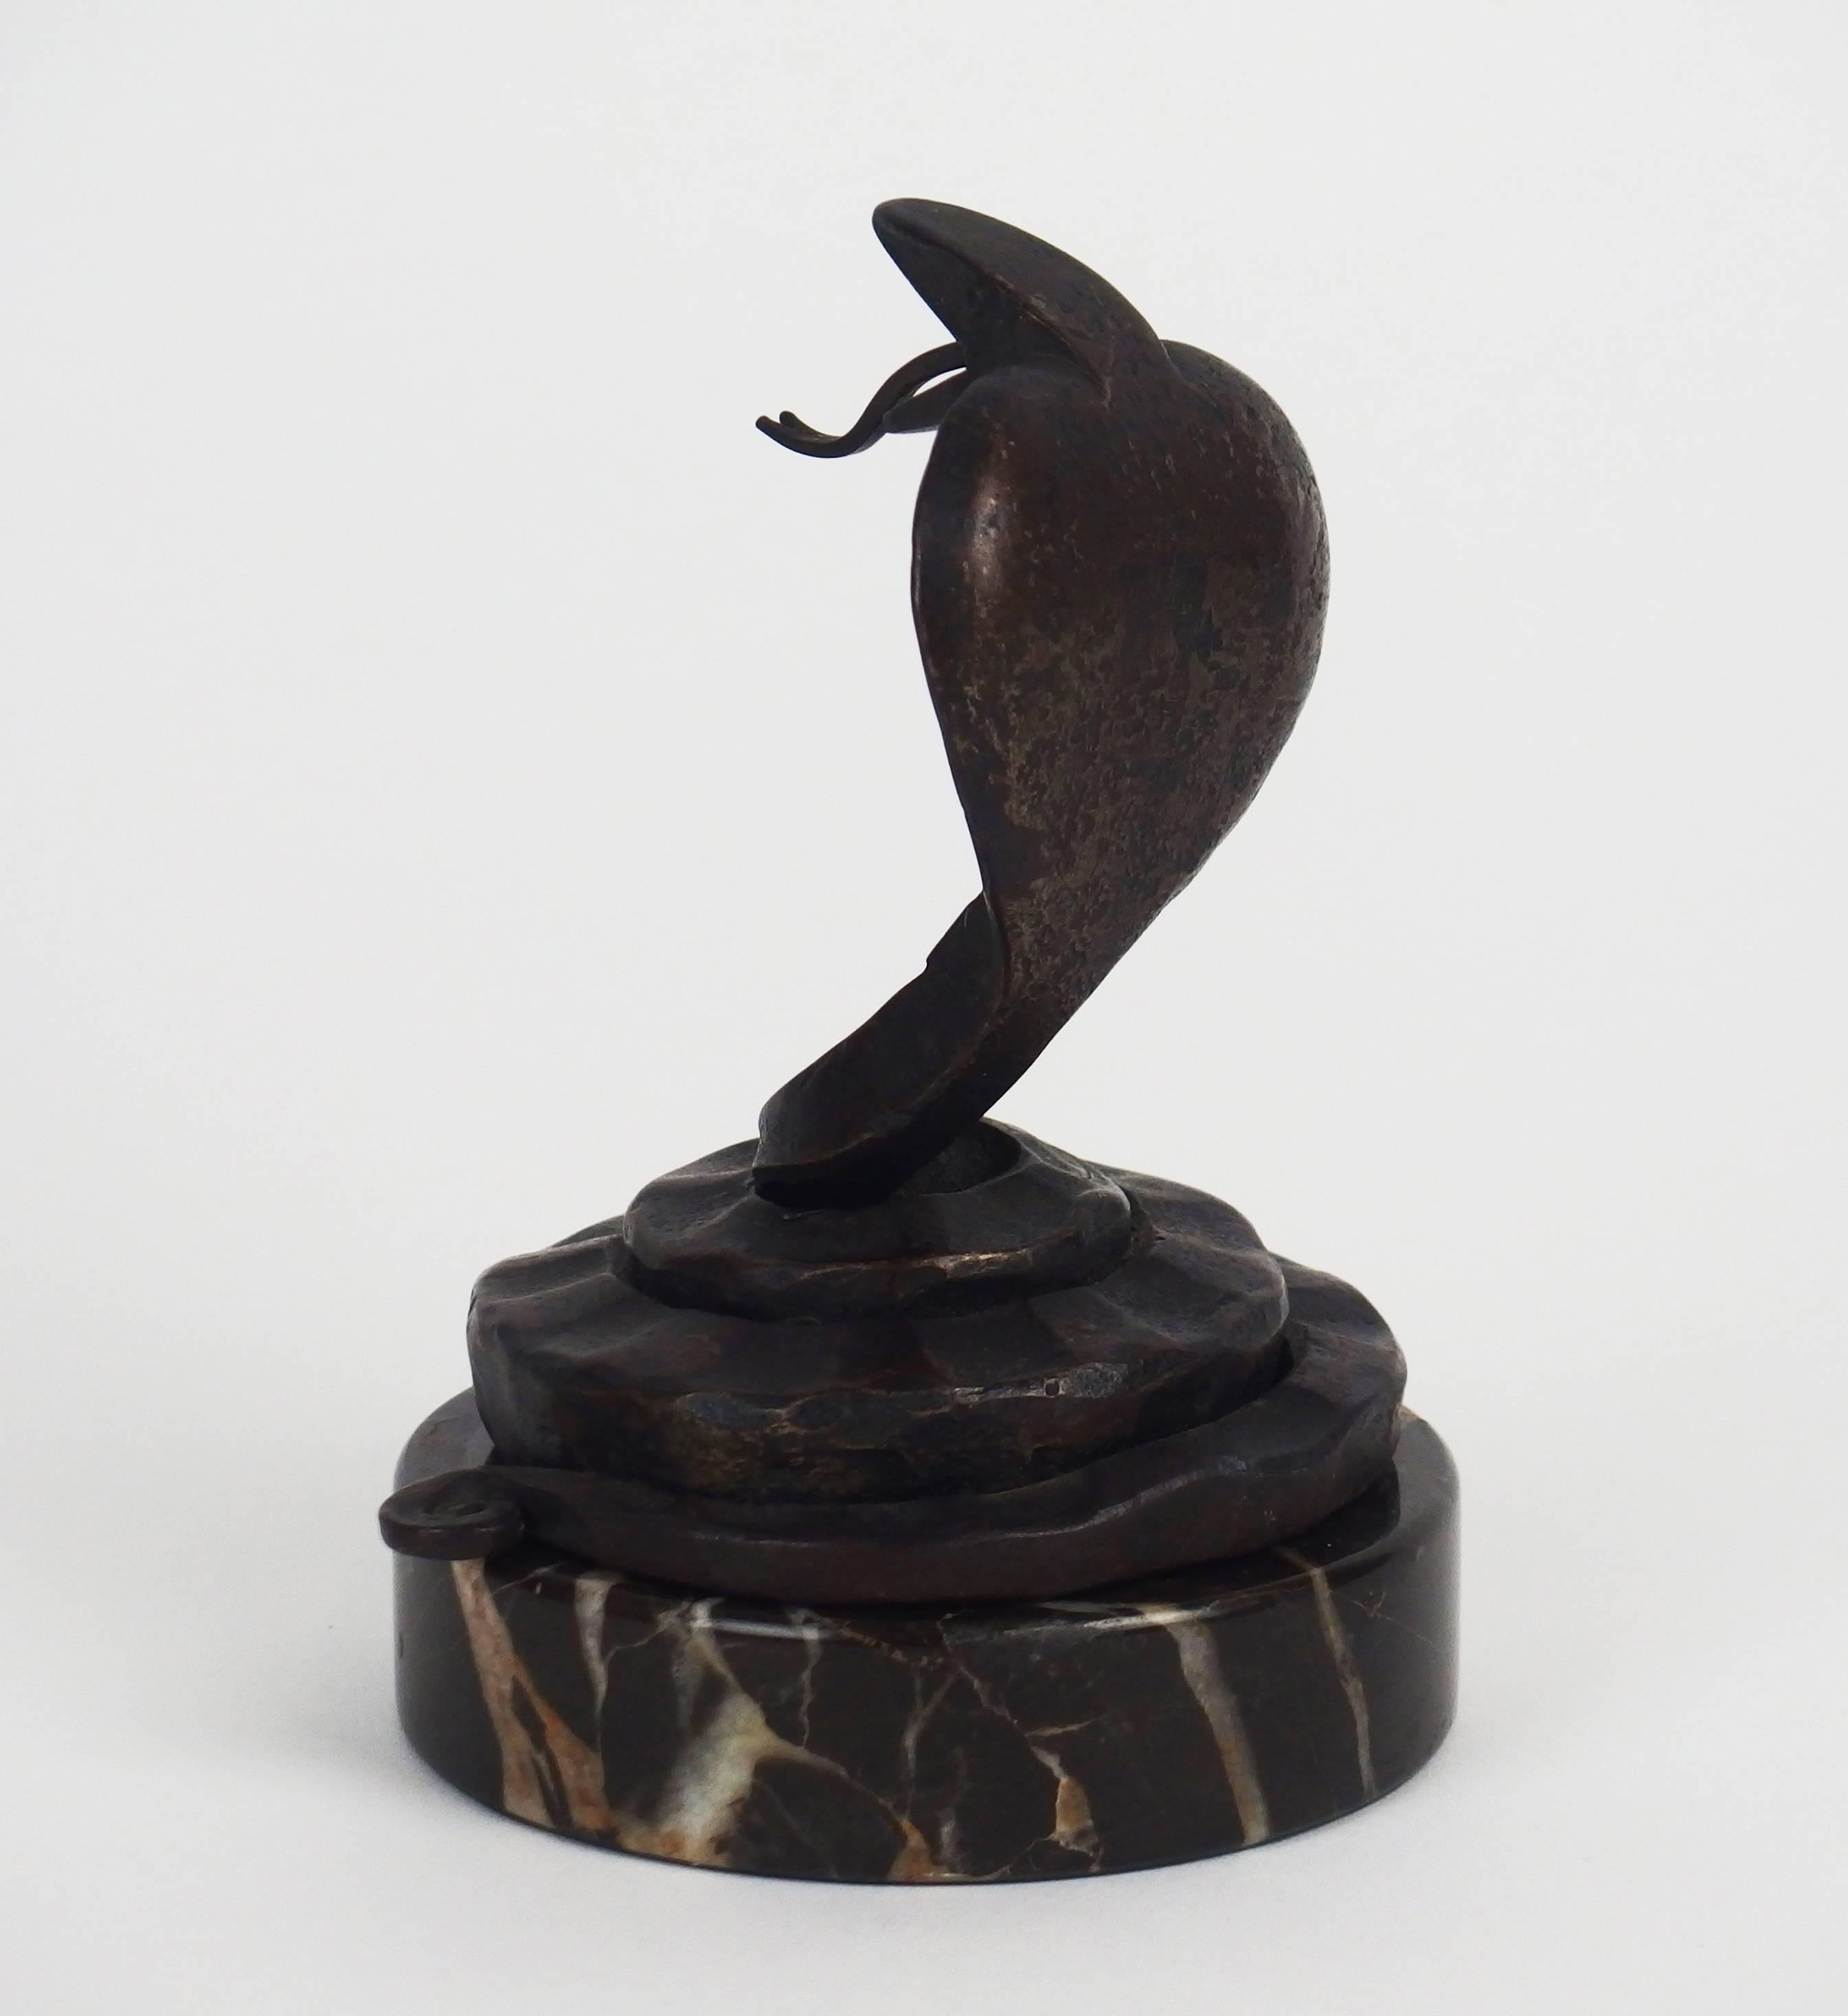 A wrought iron coiled up cobra on a black marble base. Stamped by the artist on the lower coil.
Measures: height without marble base: 4.5in.